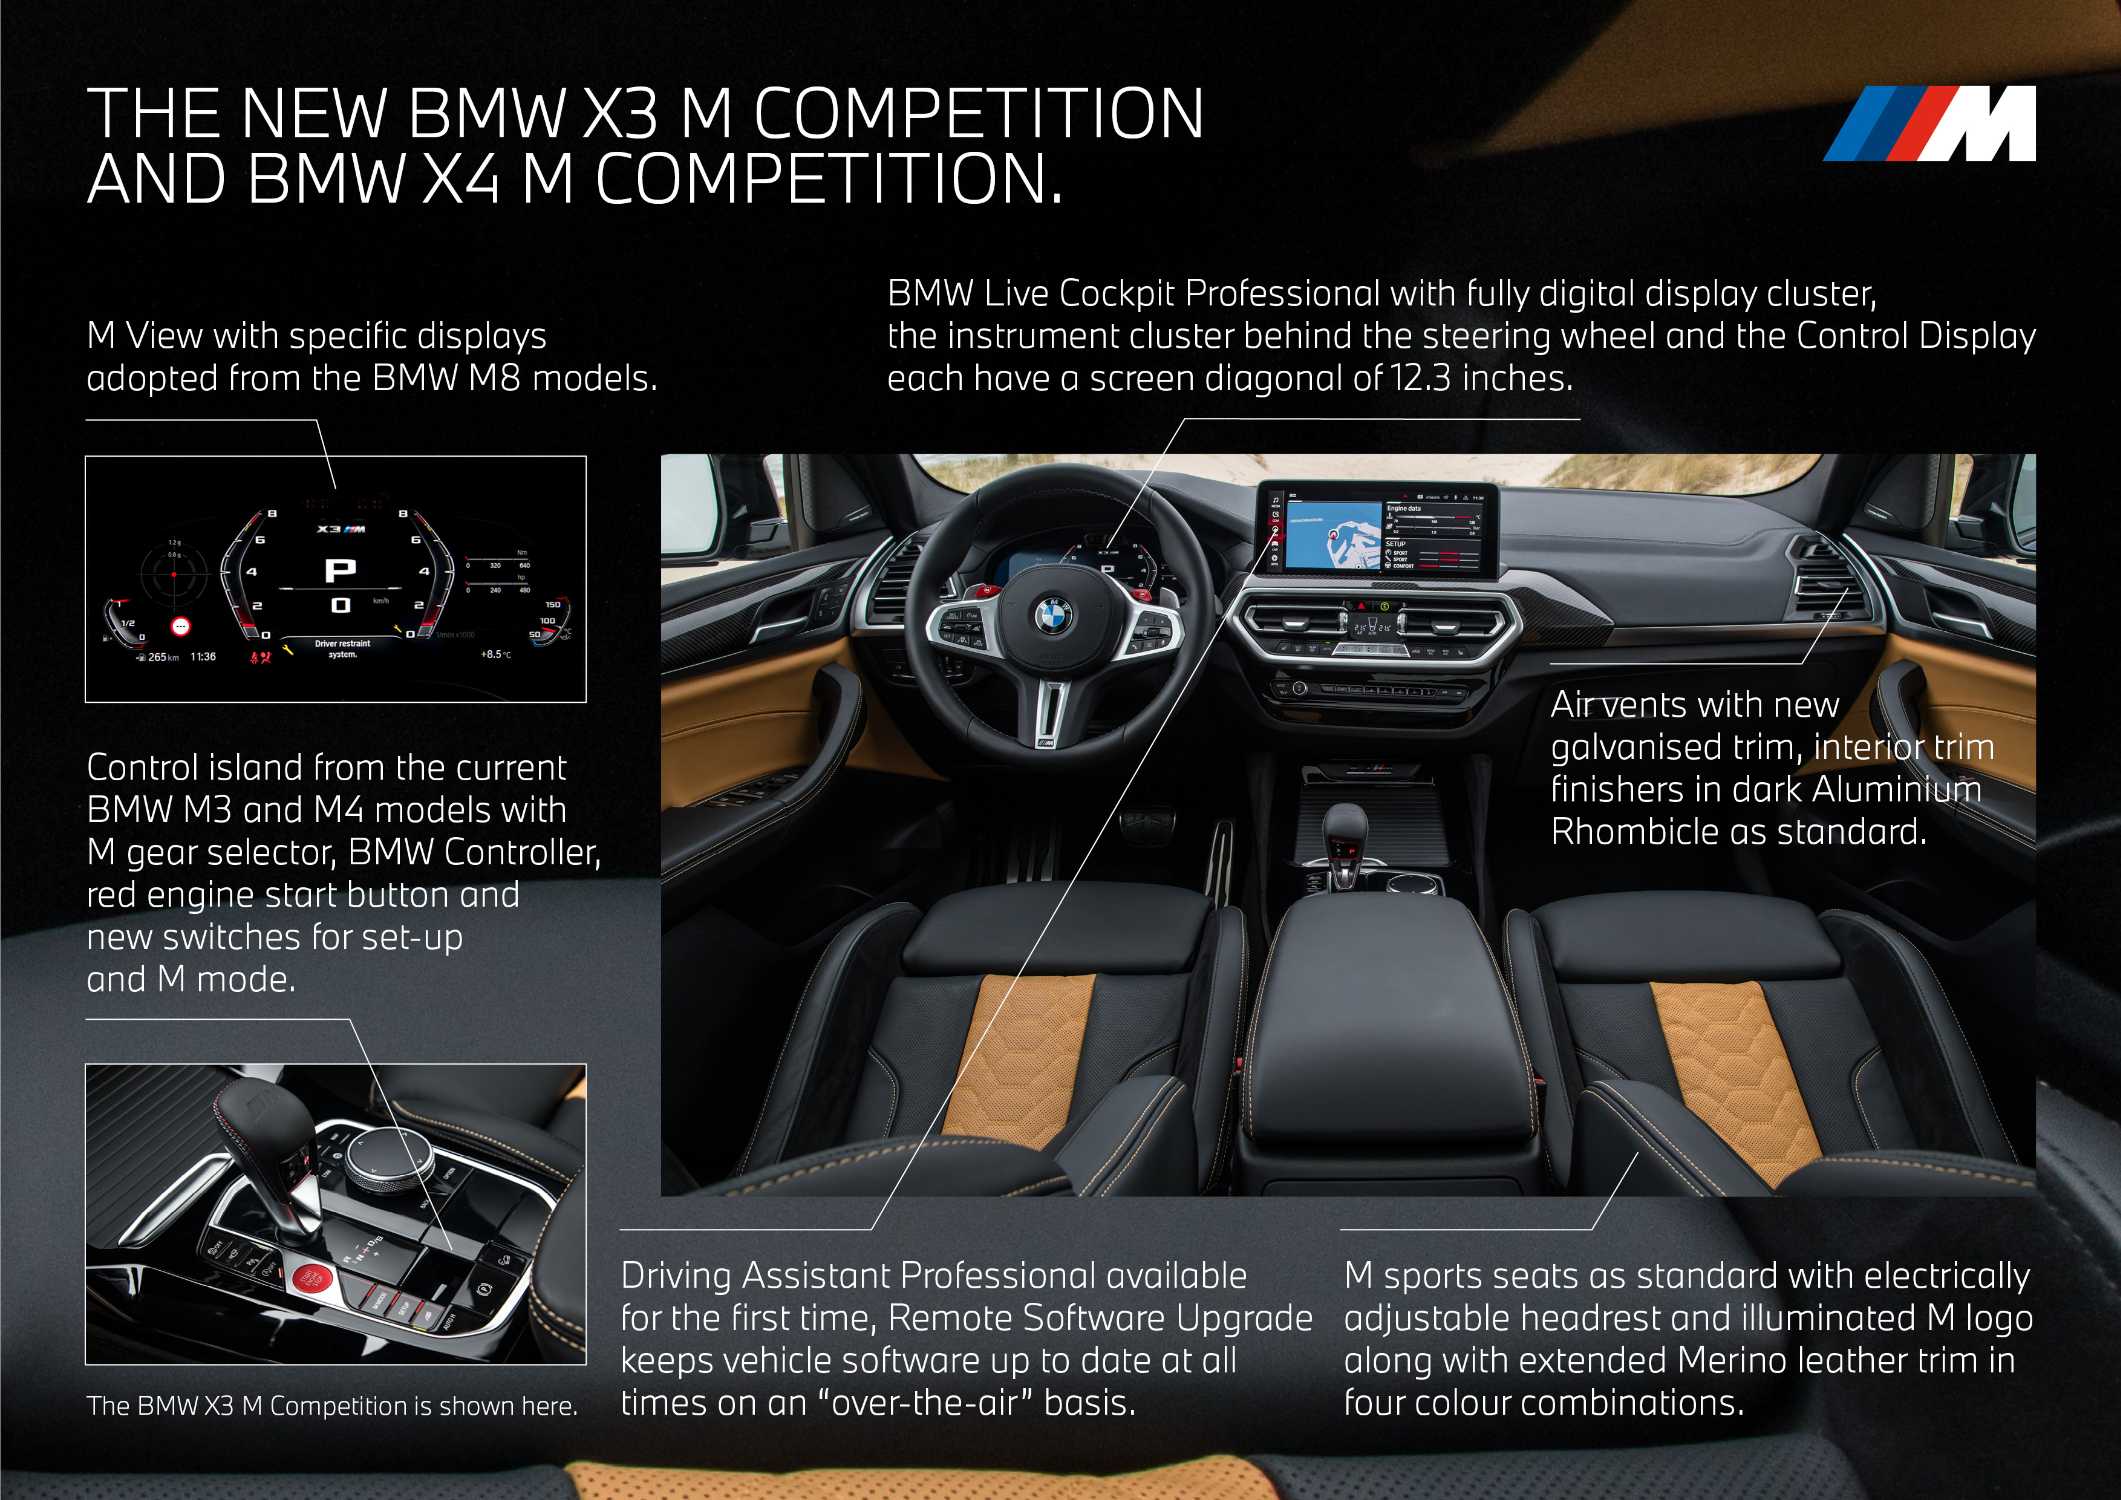 The new BMW X3 M Competition and the new BMW X4 M Competition (06/2021).